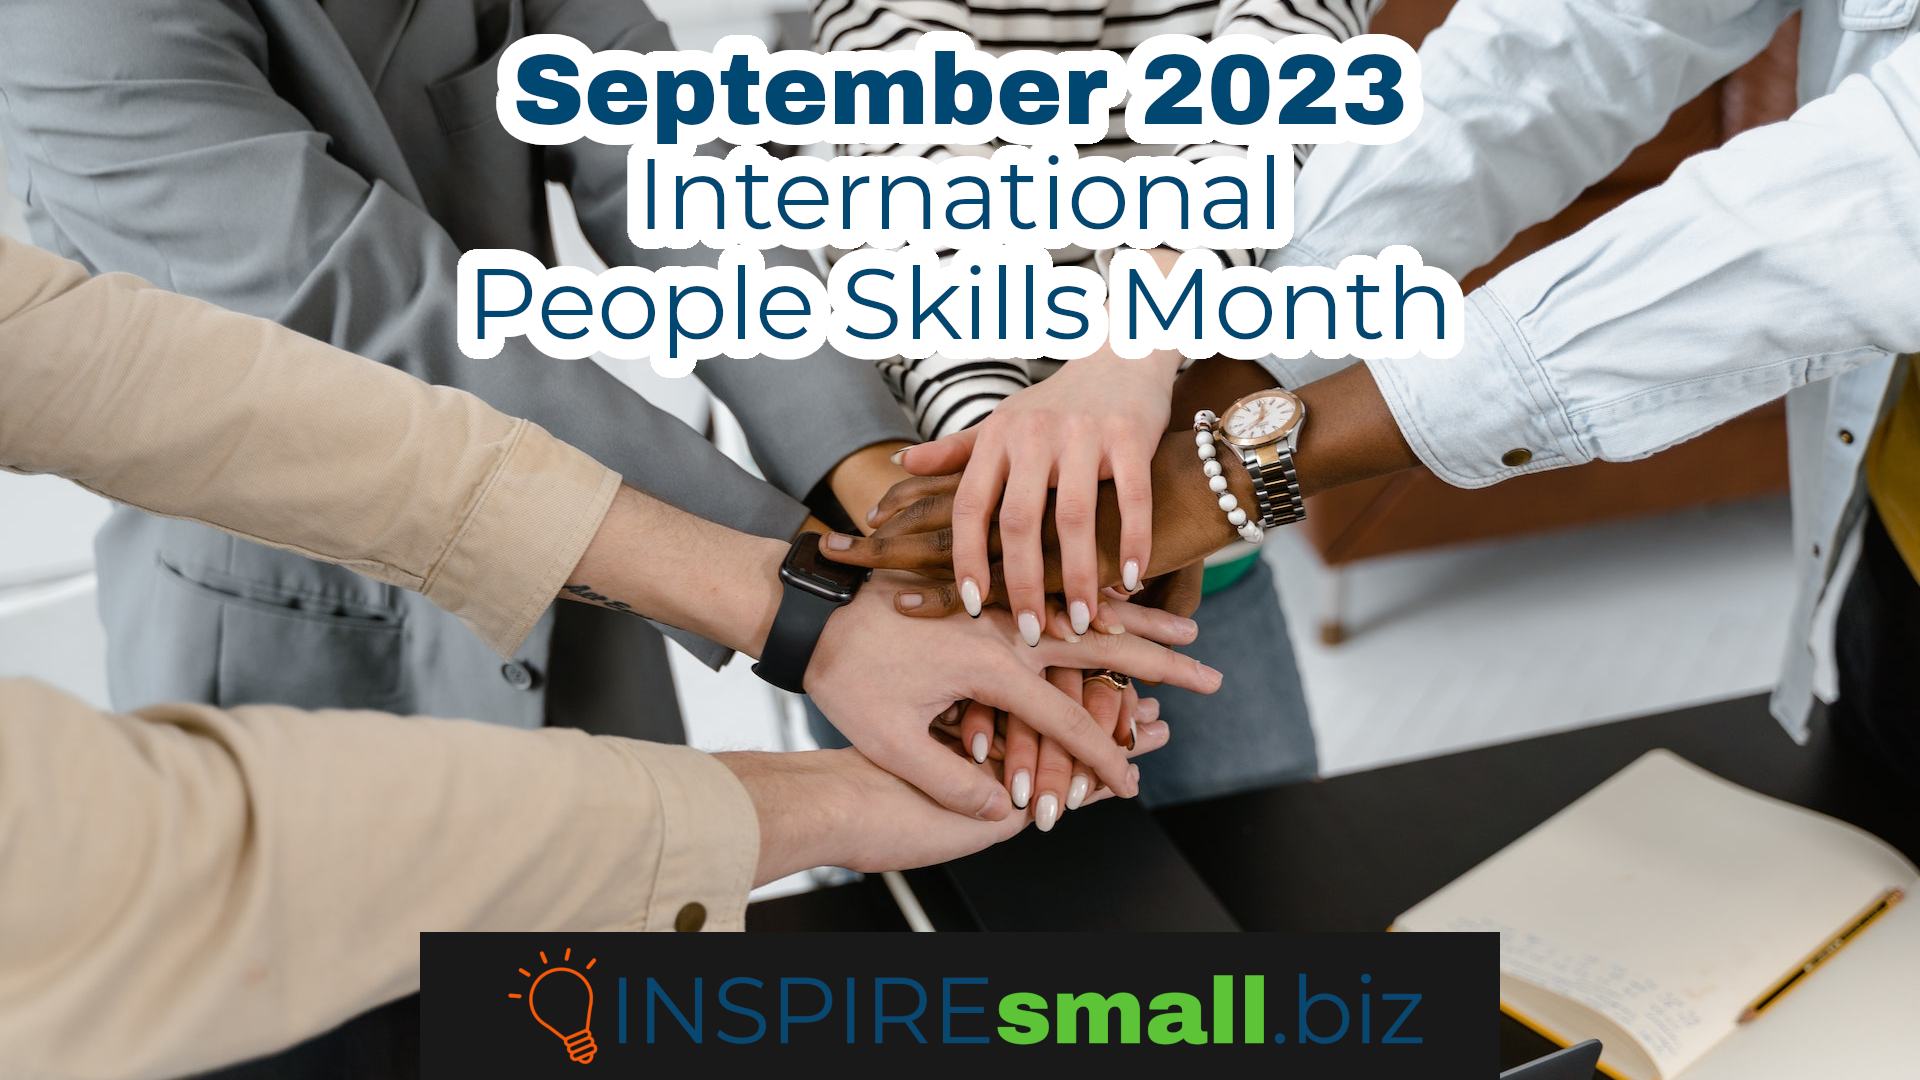 International People Skills Month – September 2023 Networking & Events